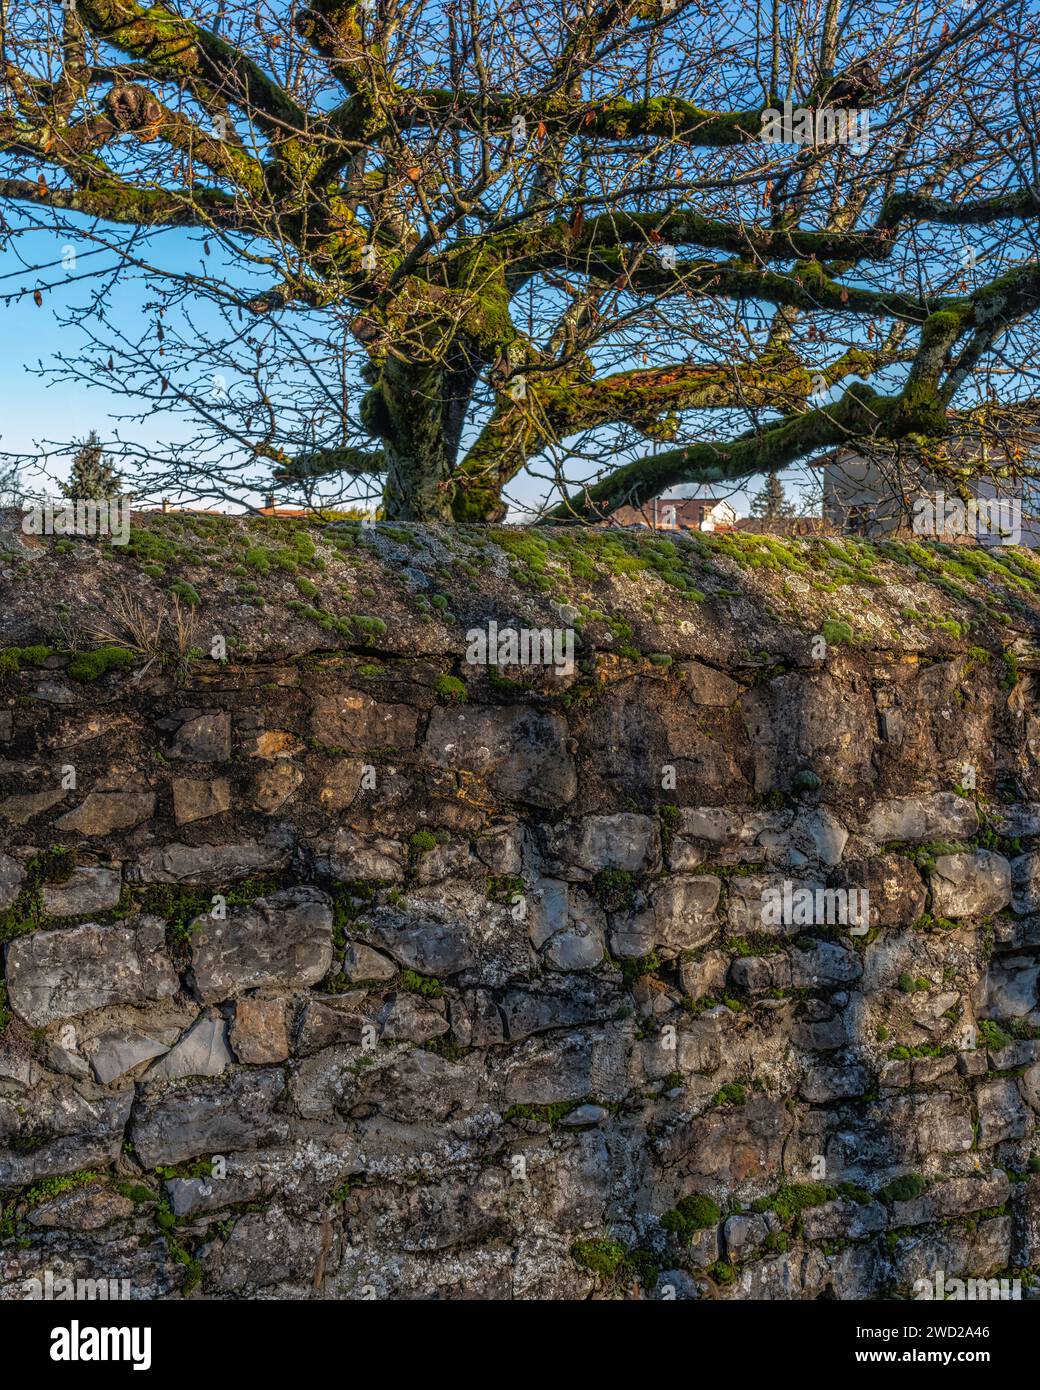 Moss-covered dry stone walls surround private homes. Saint-Quentin-Fallavier, Isère department, Auvergne-Rhône-Alpes region, France, Europe Stock Photo